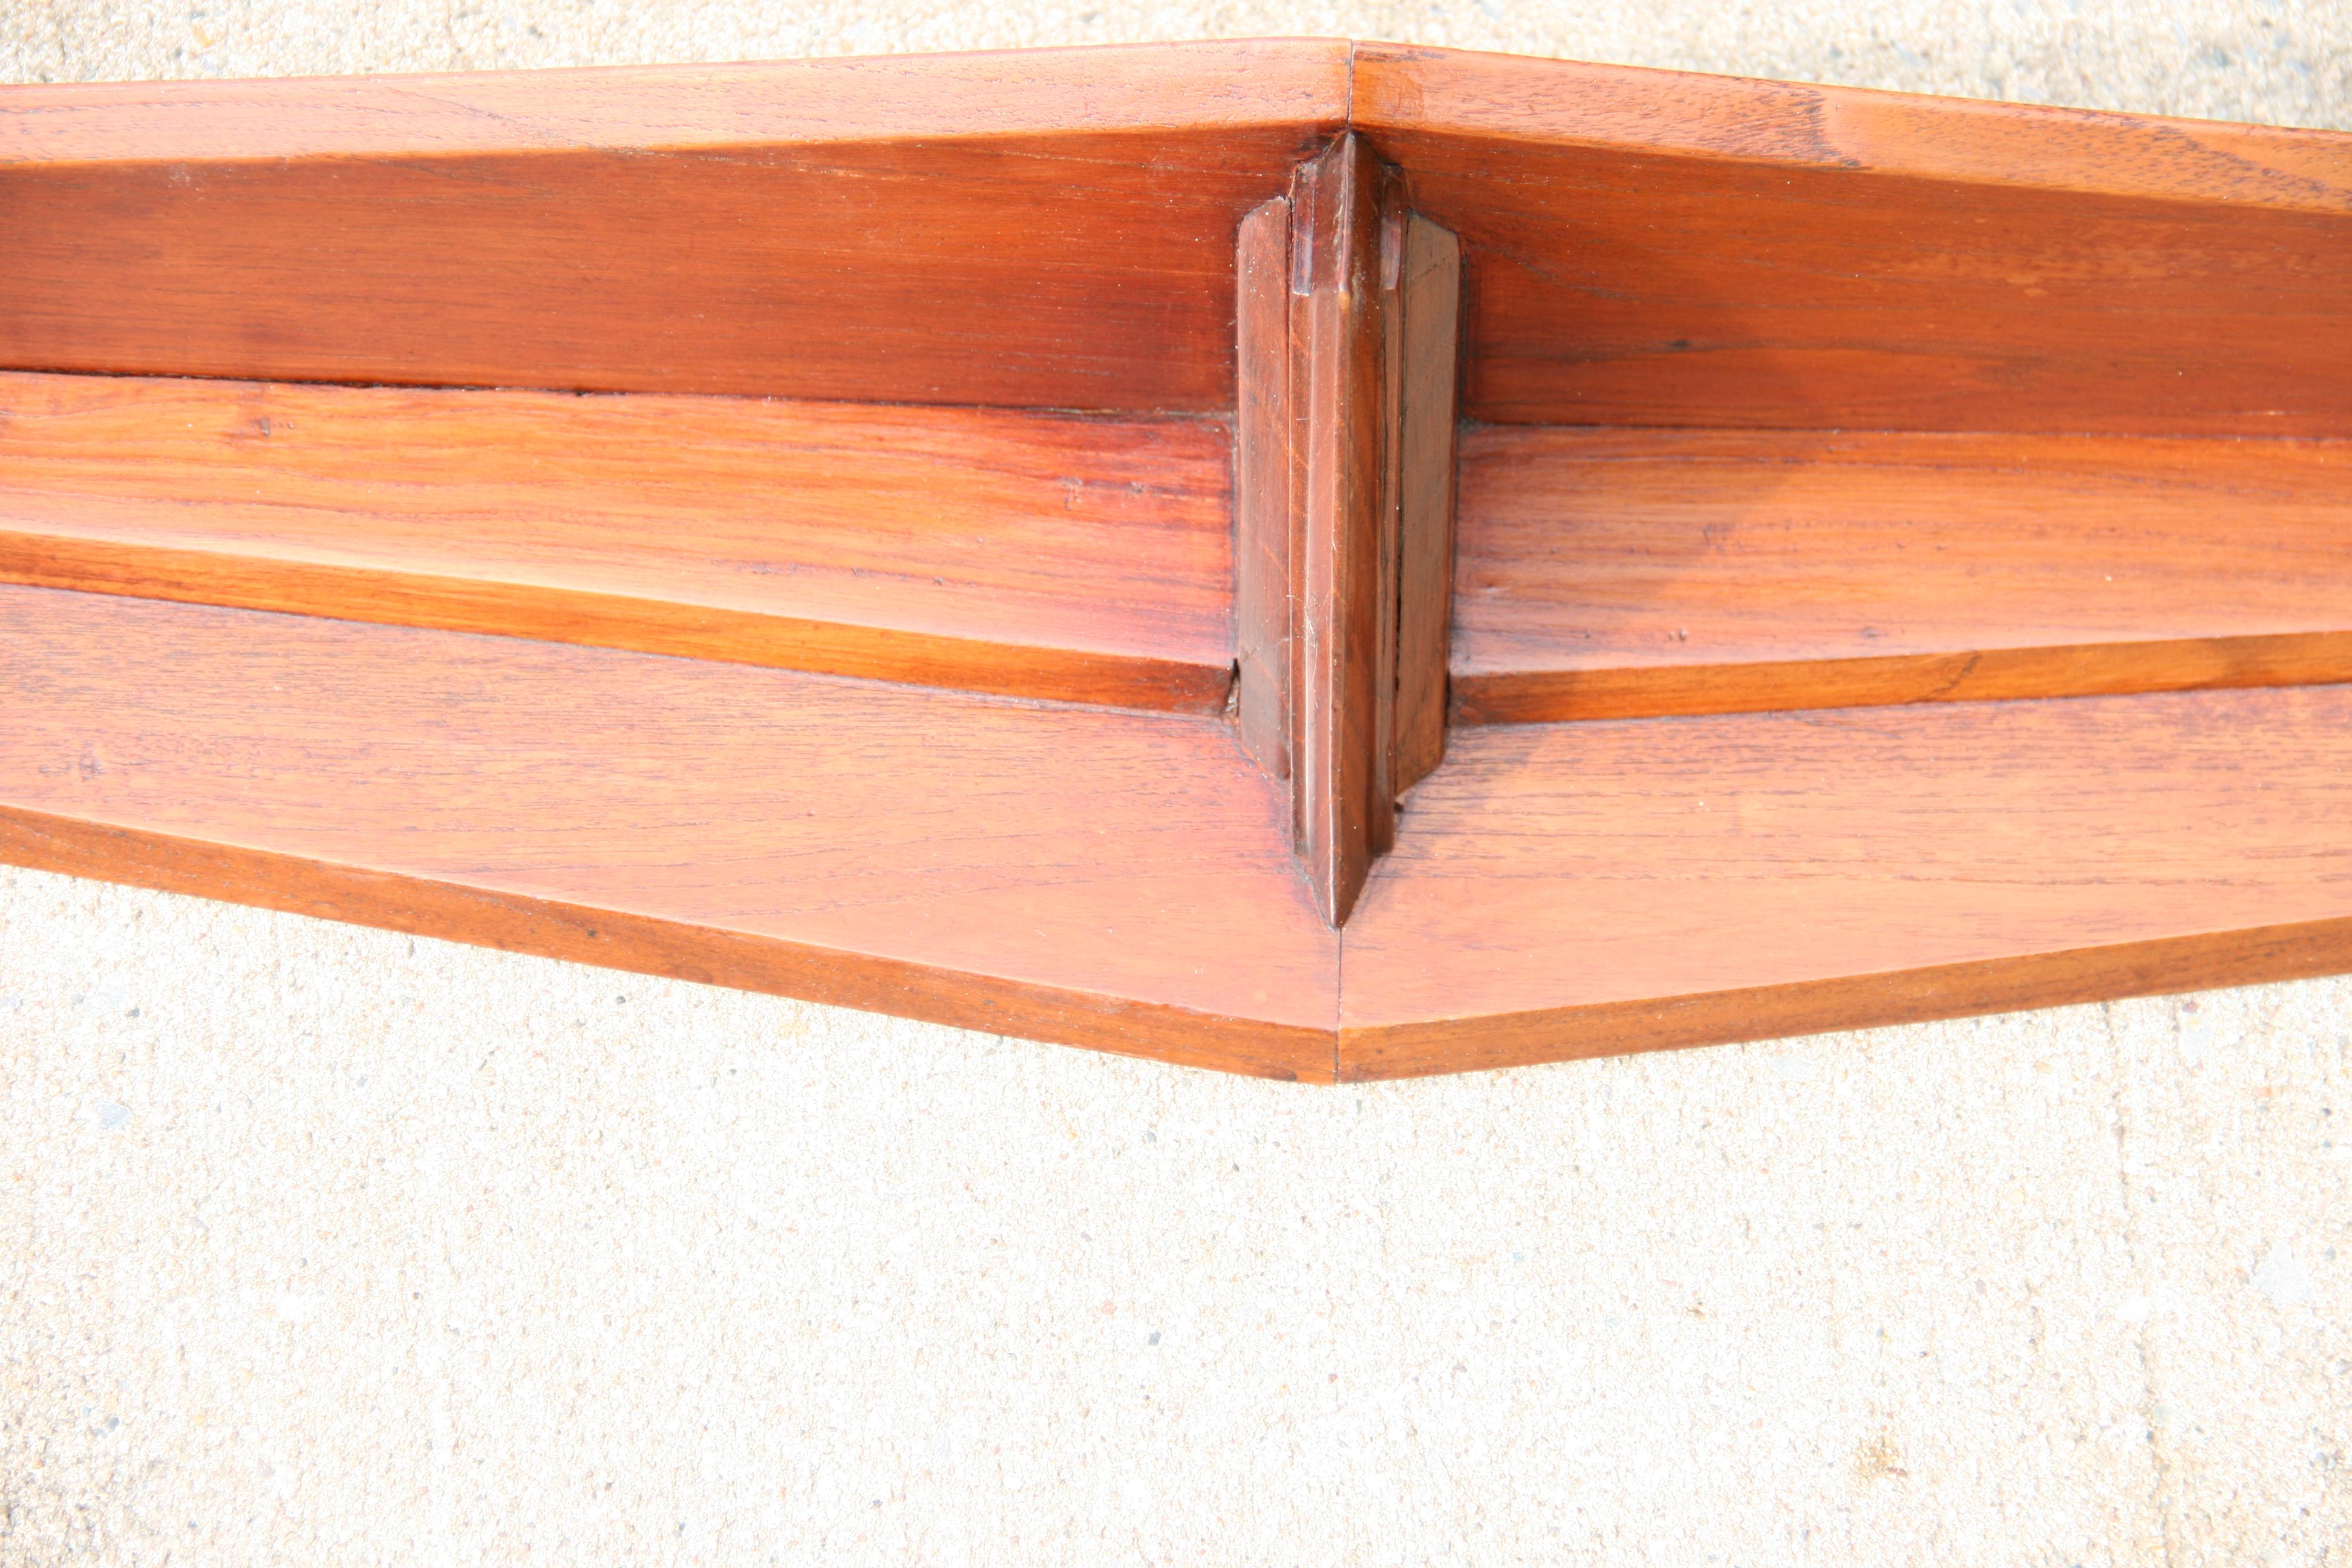 Large Art Deco Wall Shelf In Good Condition For Sale In Douglas Manor, NY